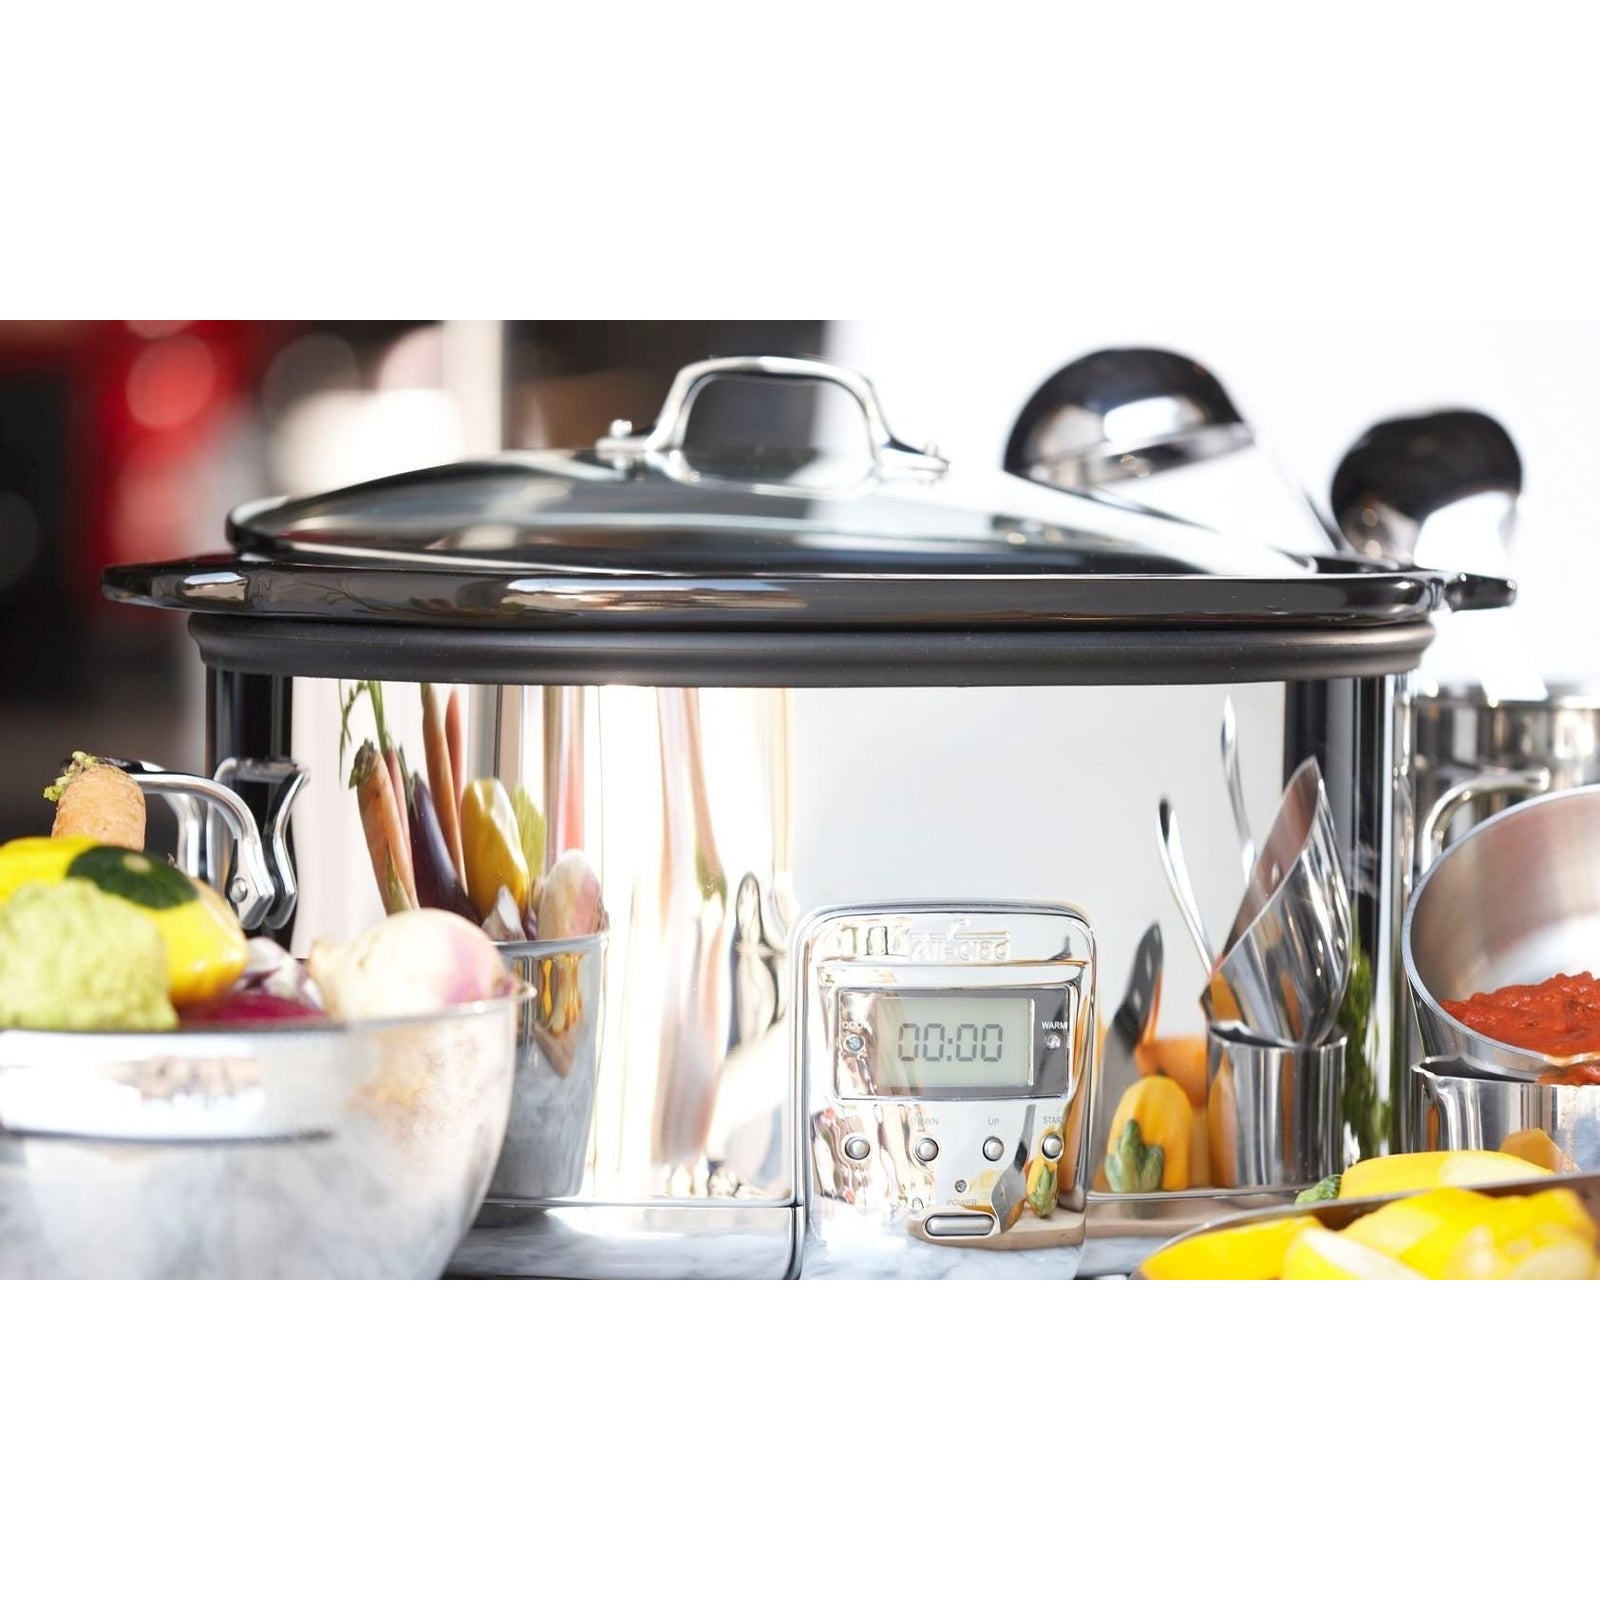 All-Clad Electrics Stainless Steel and Ceramic Slow Cooker with Insert and  Lid 6.5 Quart Nonstick 320 Watts Oval Shaped, Programmable, Dishwasher Safe